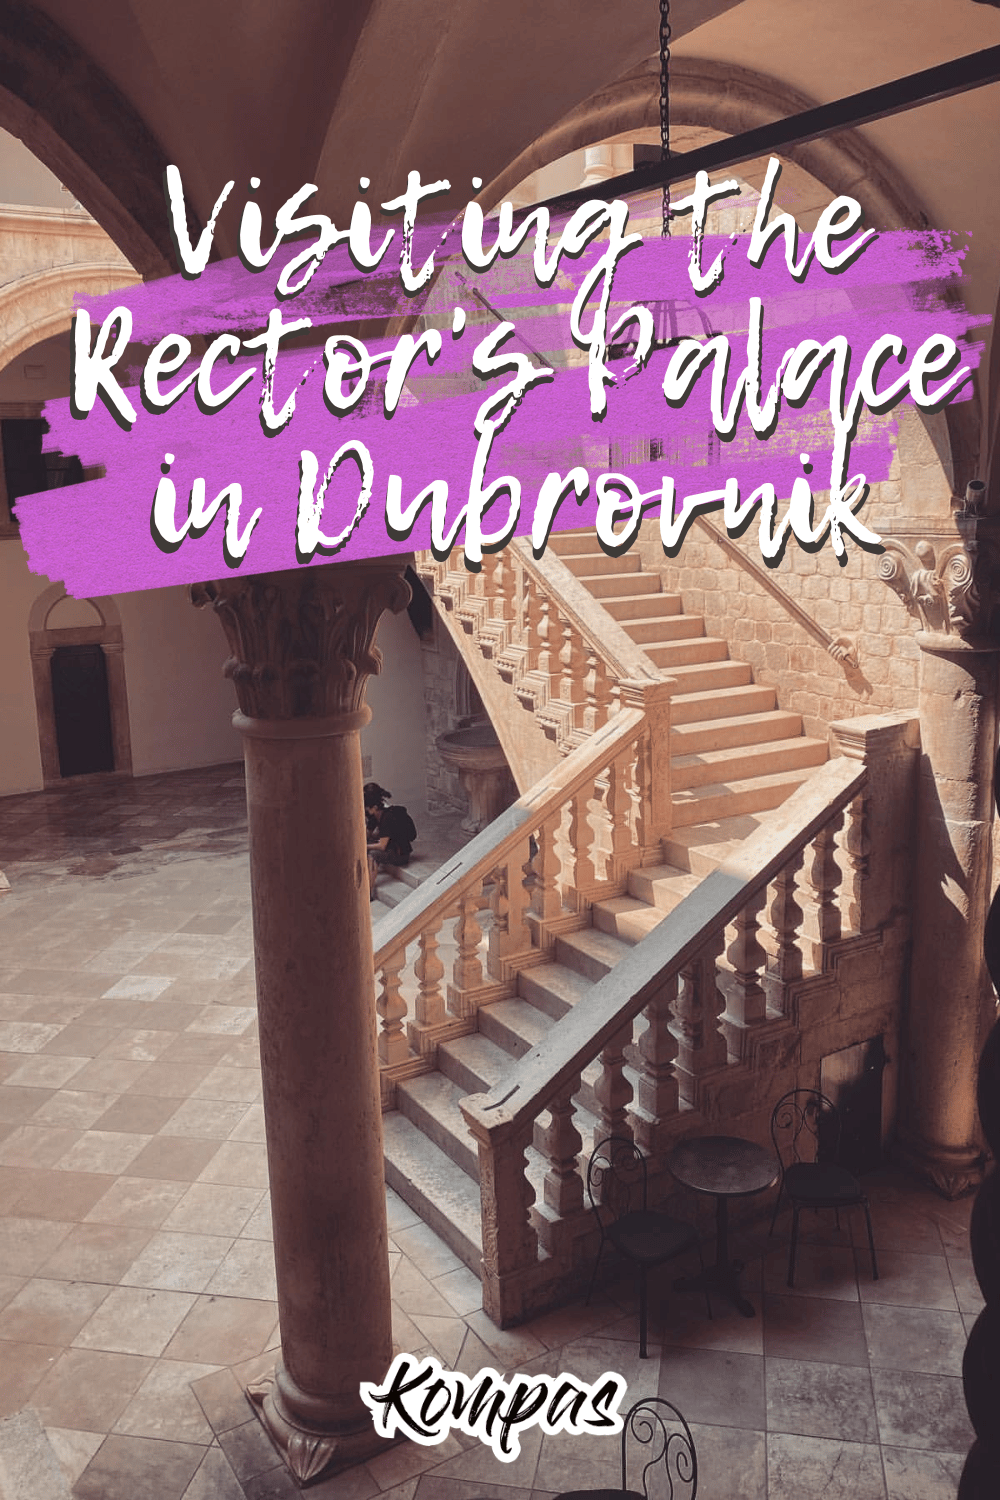 Visiting Dubrovnik Rector's Palace, Centrally located in the Old Town, the palace is worth a visit especially for the level of Architecture, a must-see for history and art enthusiasts